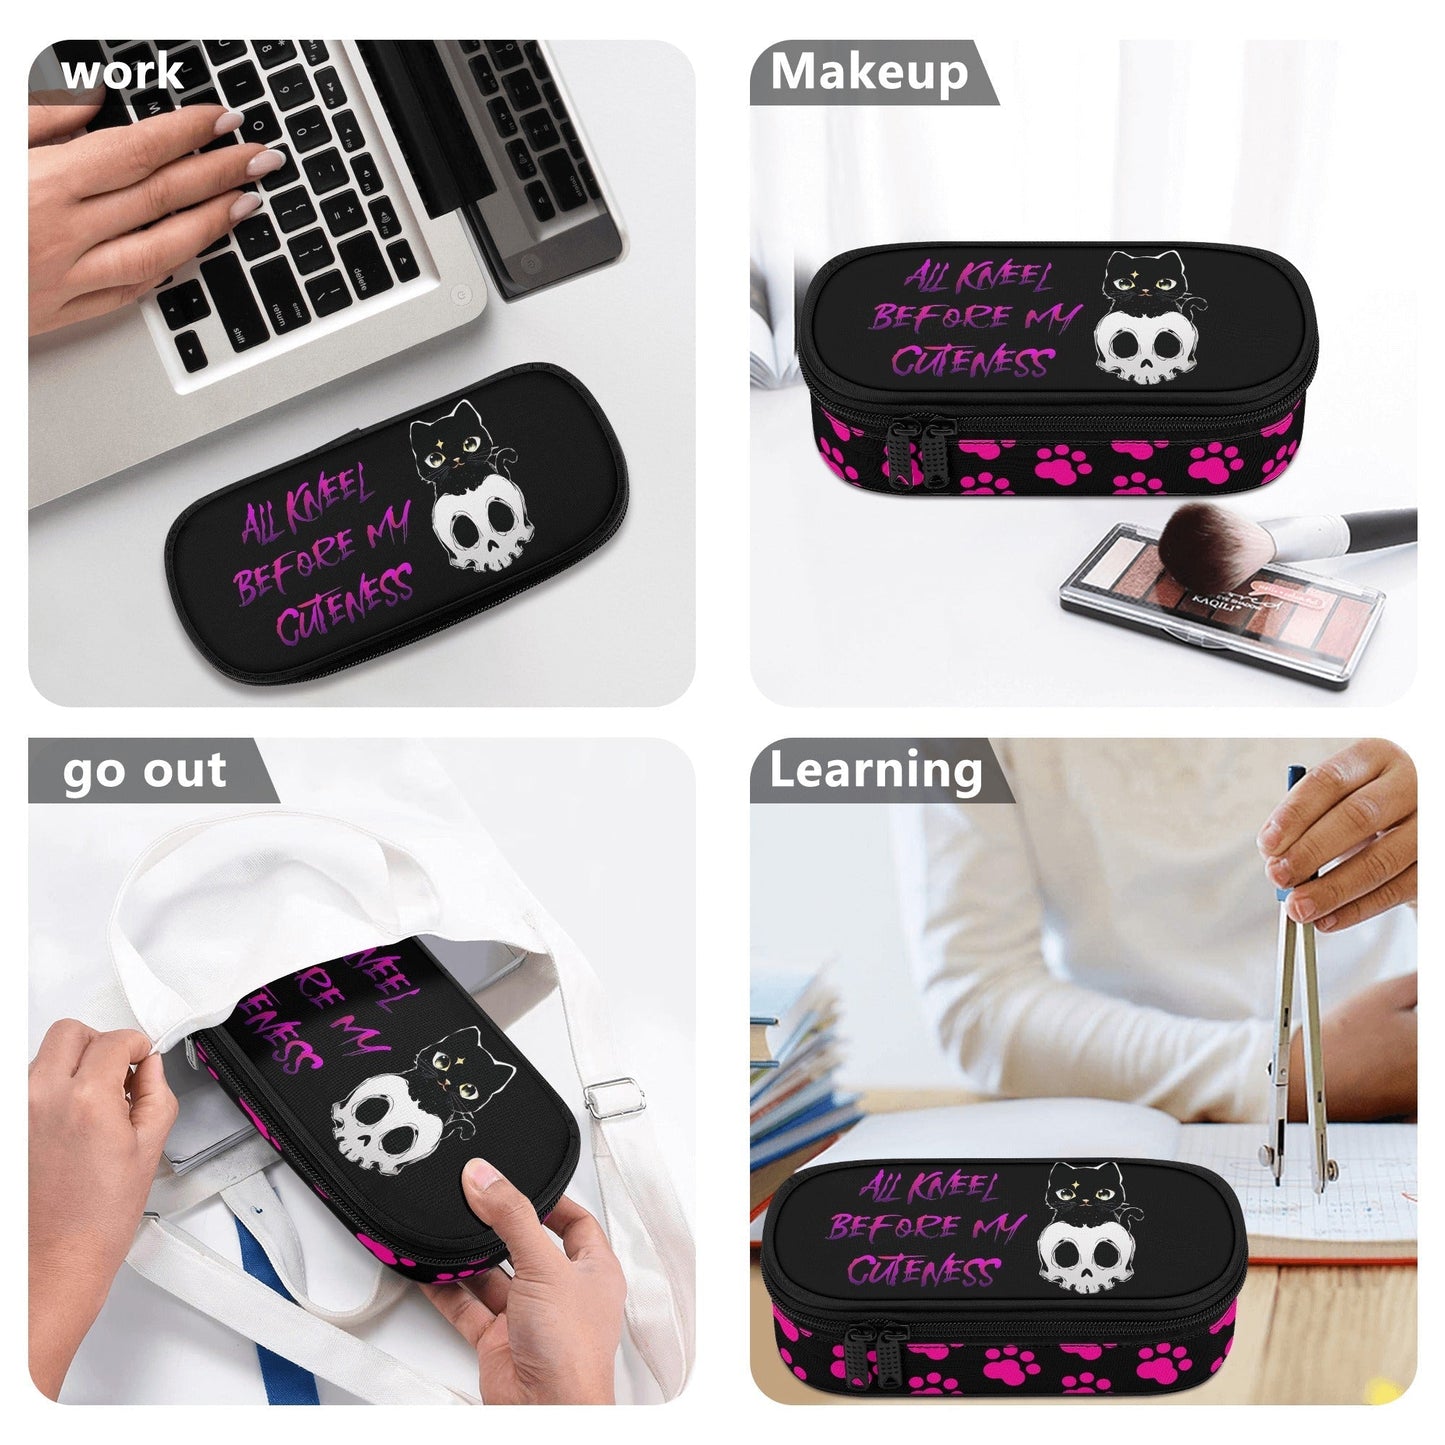 Stand out  with the  Kneel before my cuteness 3-Layer Pencil Case  available at Hey Nugget. Grab yours today!